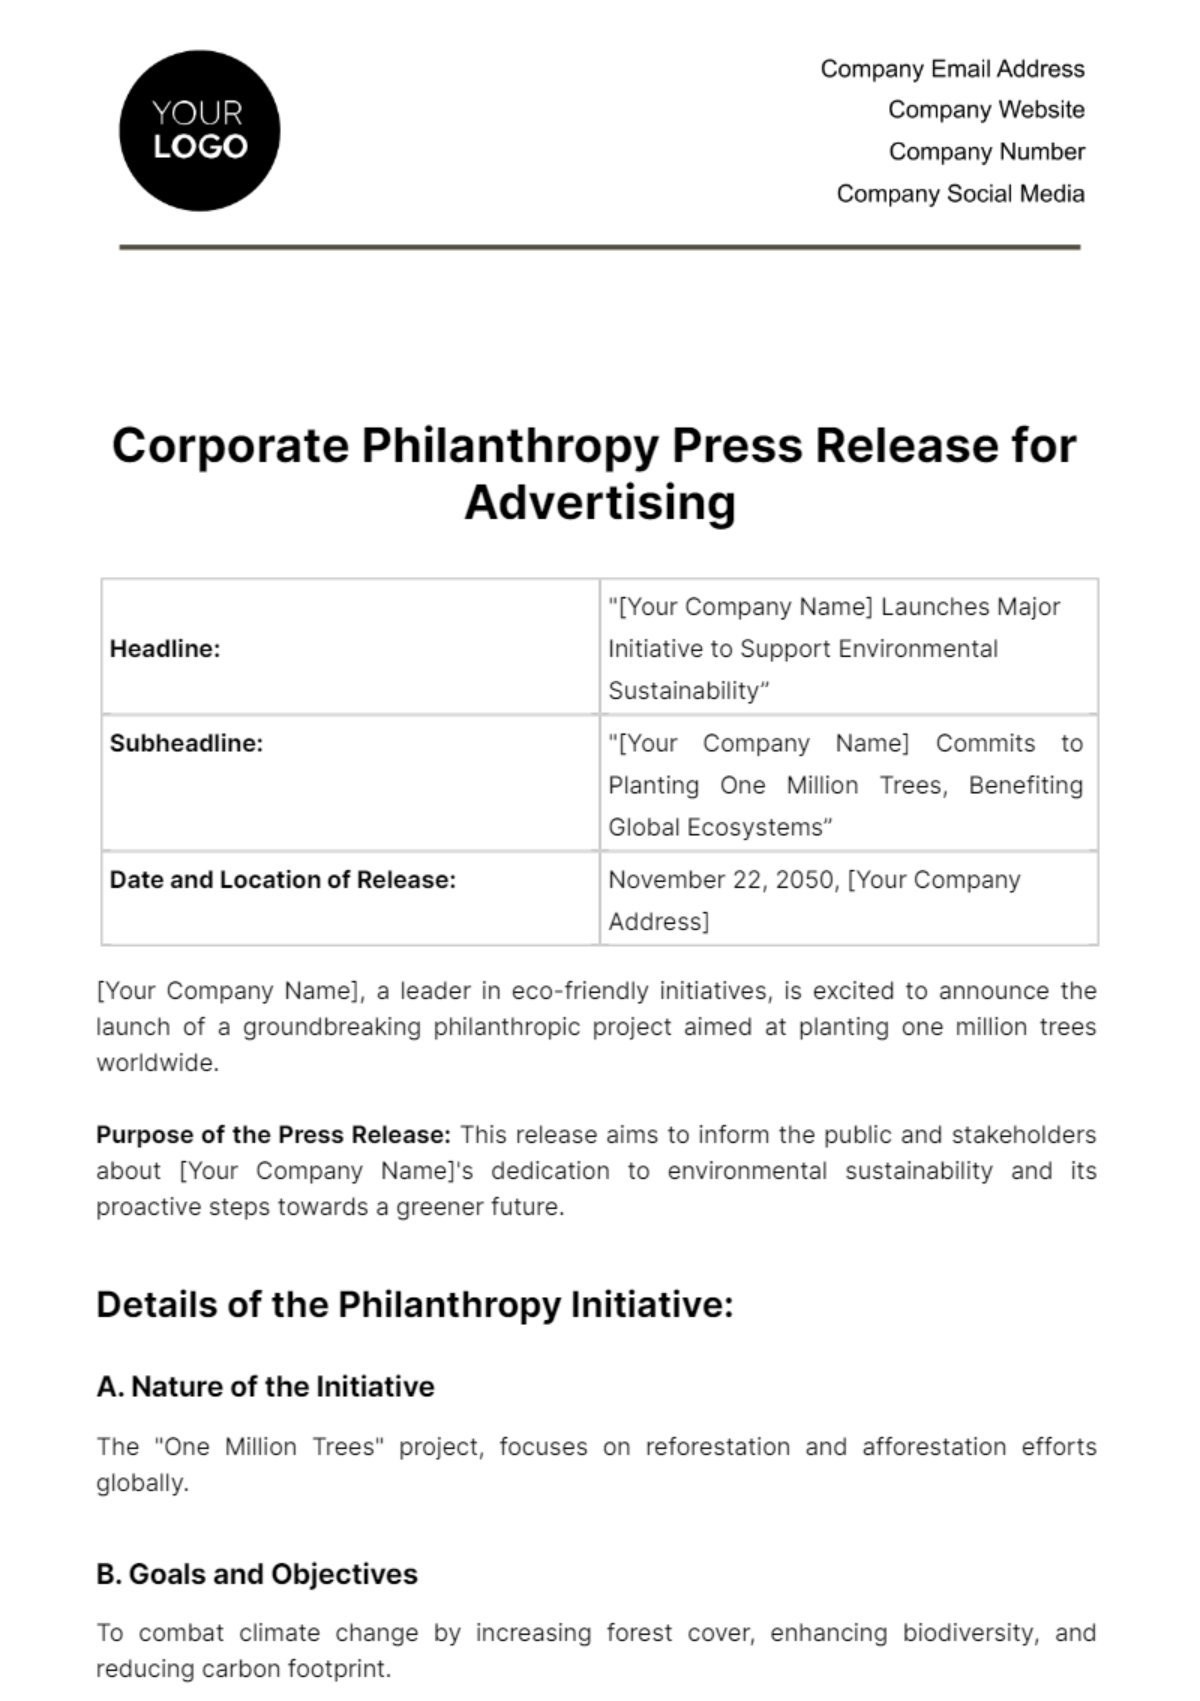 Corporate Philanthropy Press Release for Advertising Template